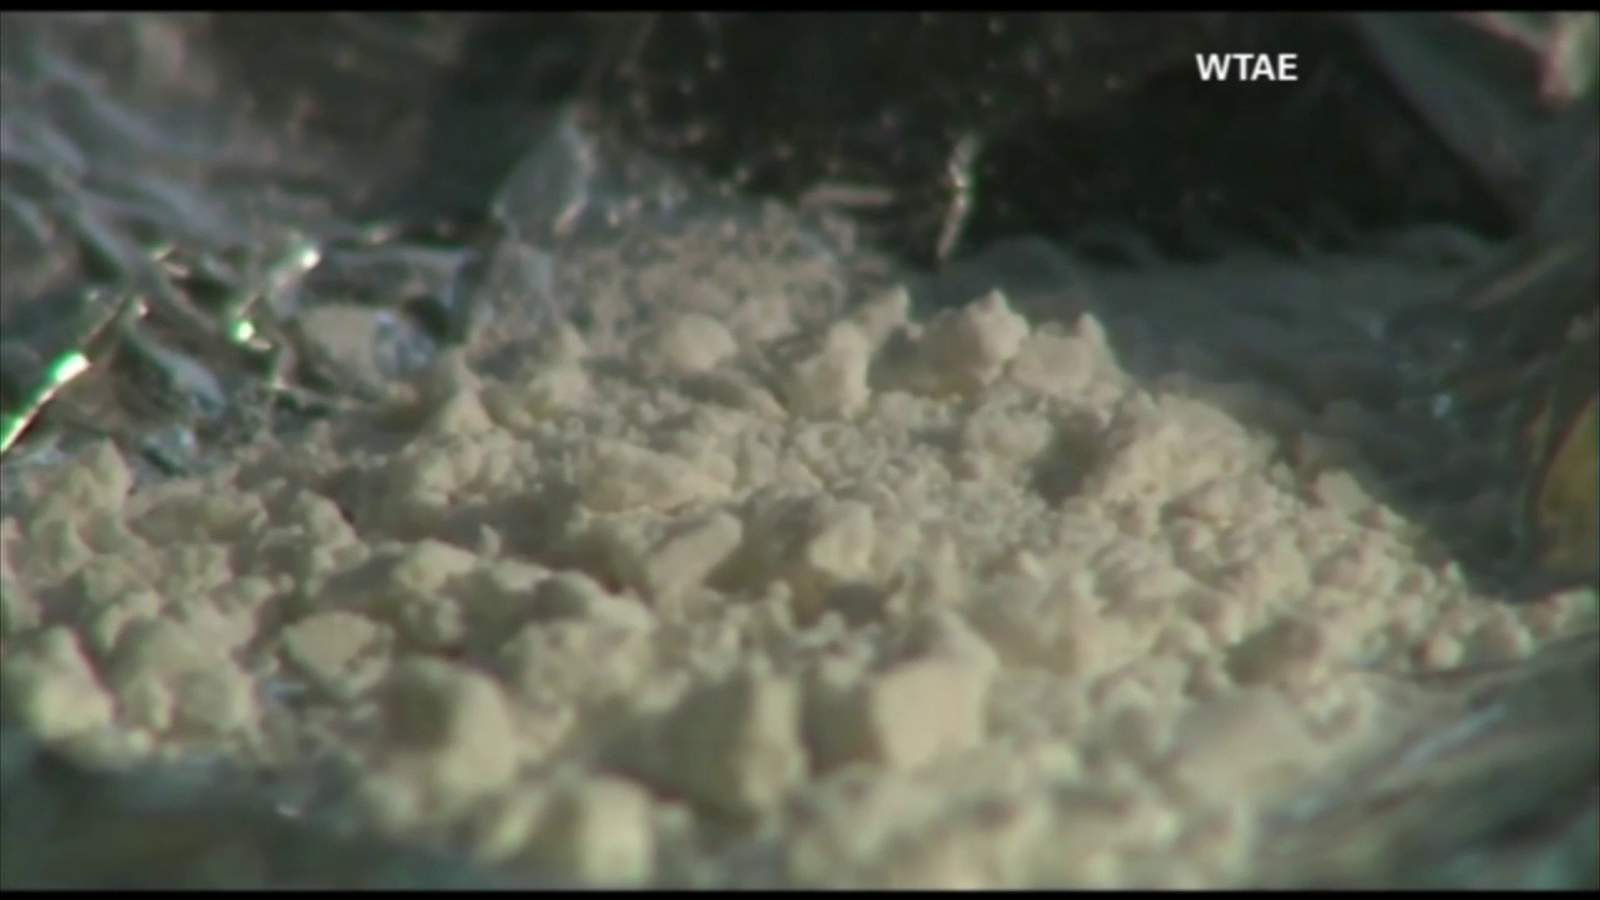 Experts present details about finding first fentanyl-laced ecstasy tablet in Houston area